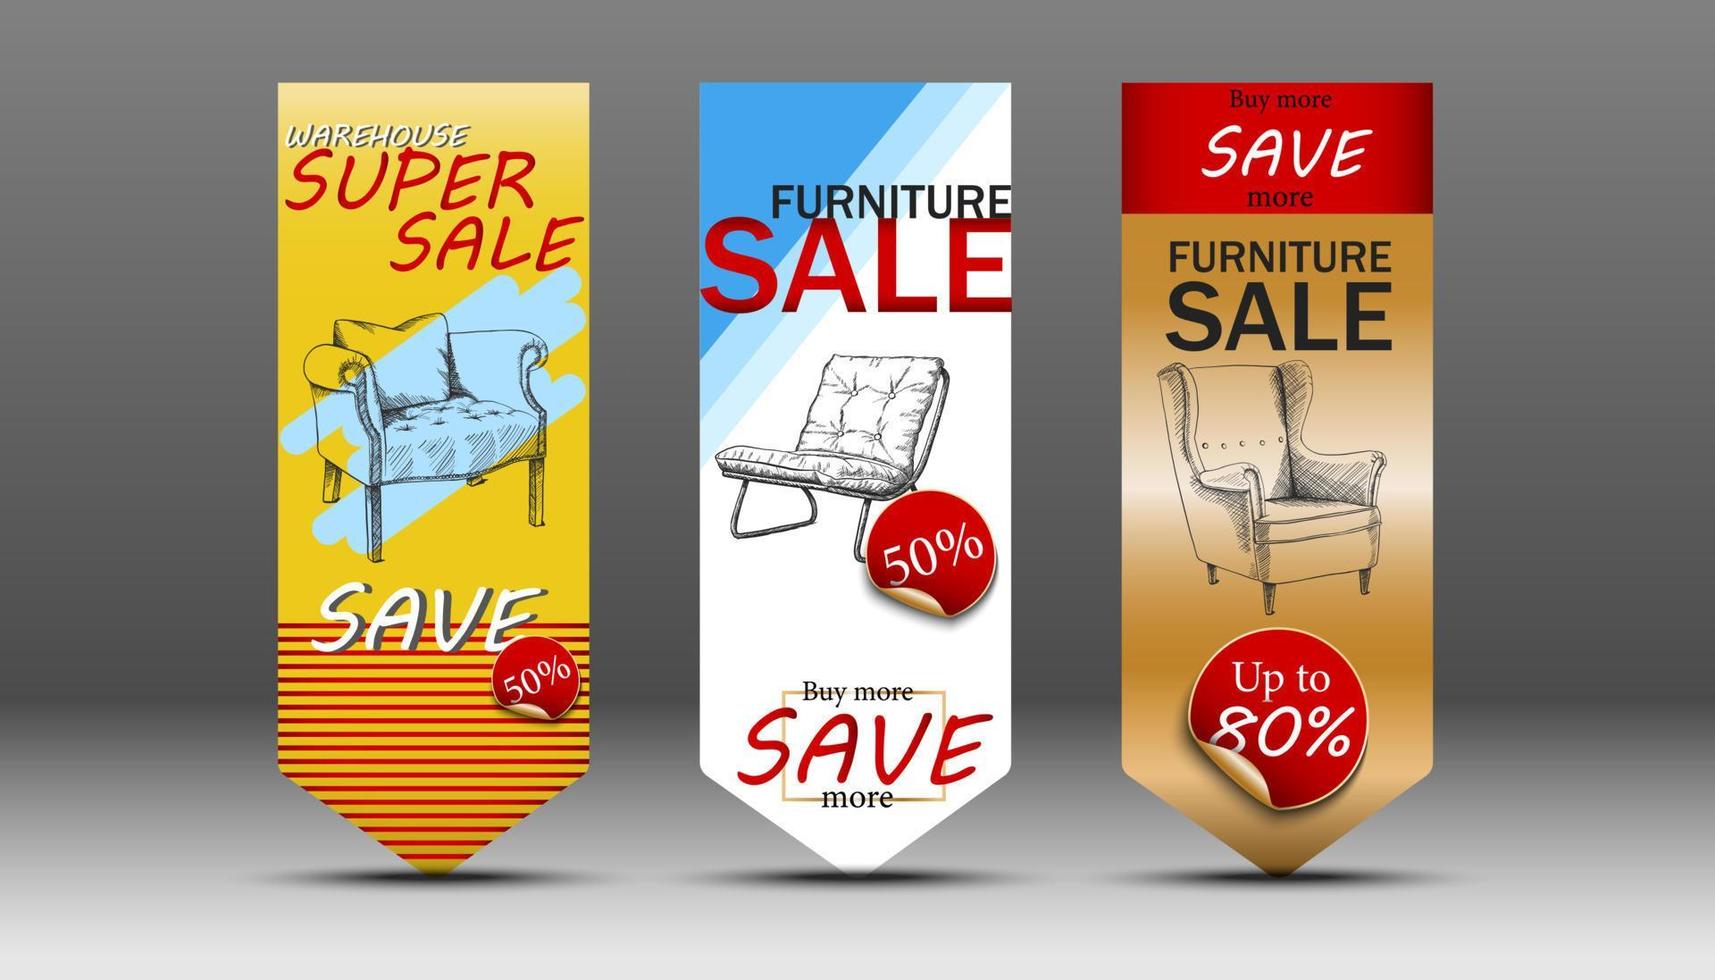 Set of vector sale banners or flyers for warehouse and furniture sale.